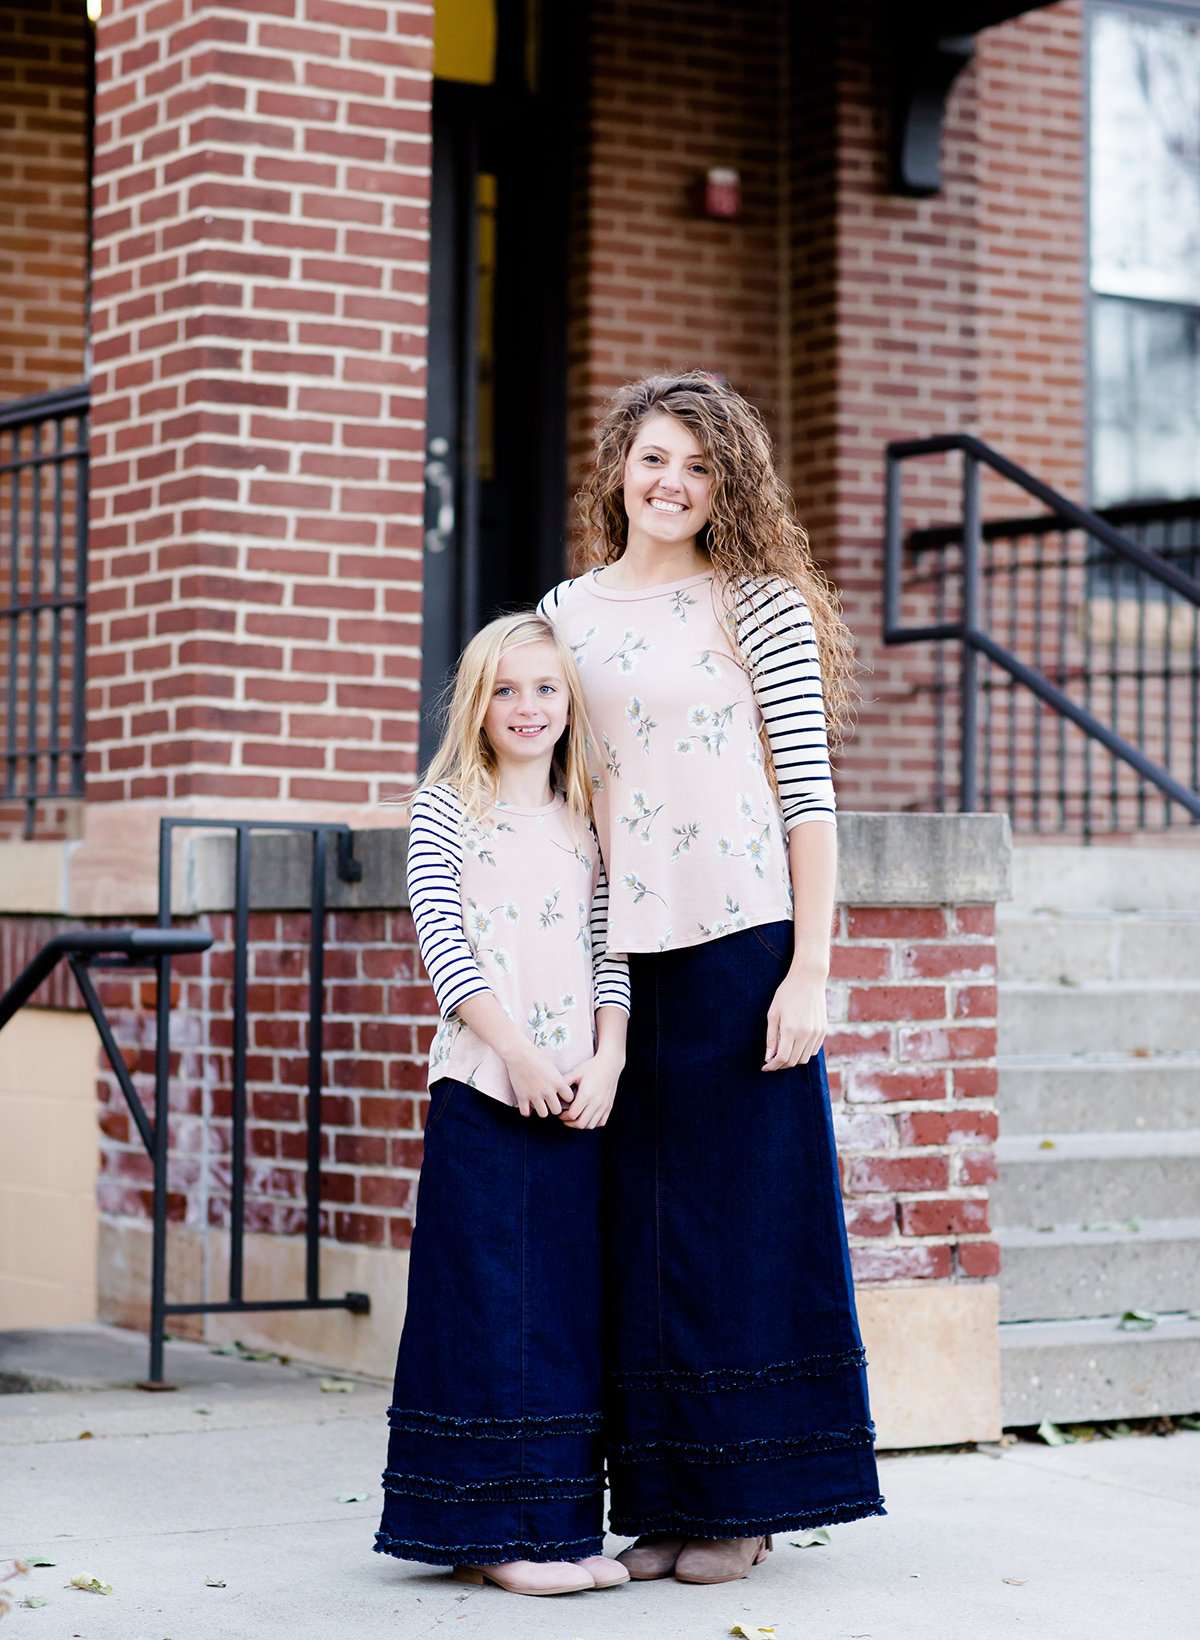 Woman wearing a modest baseball tee with black striped arms and a blush floral body along with her daughter making it a mommy and me modest raglan style tee shirt